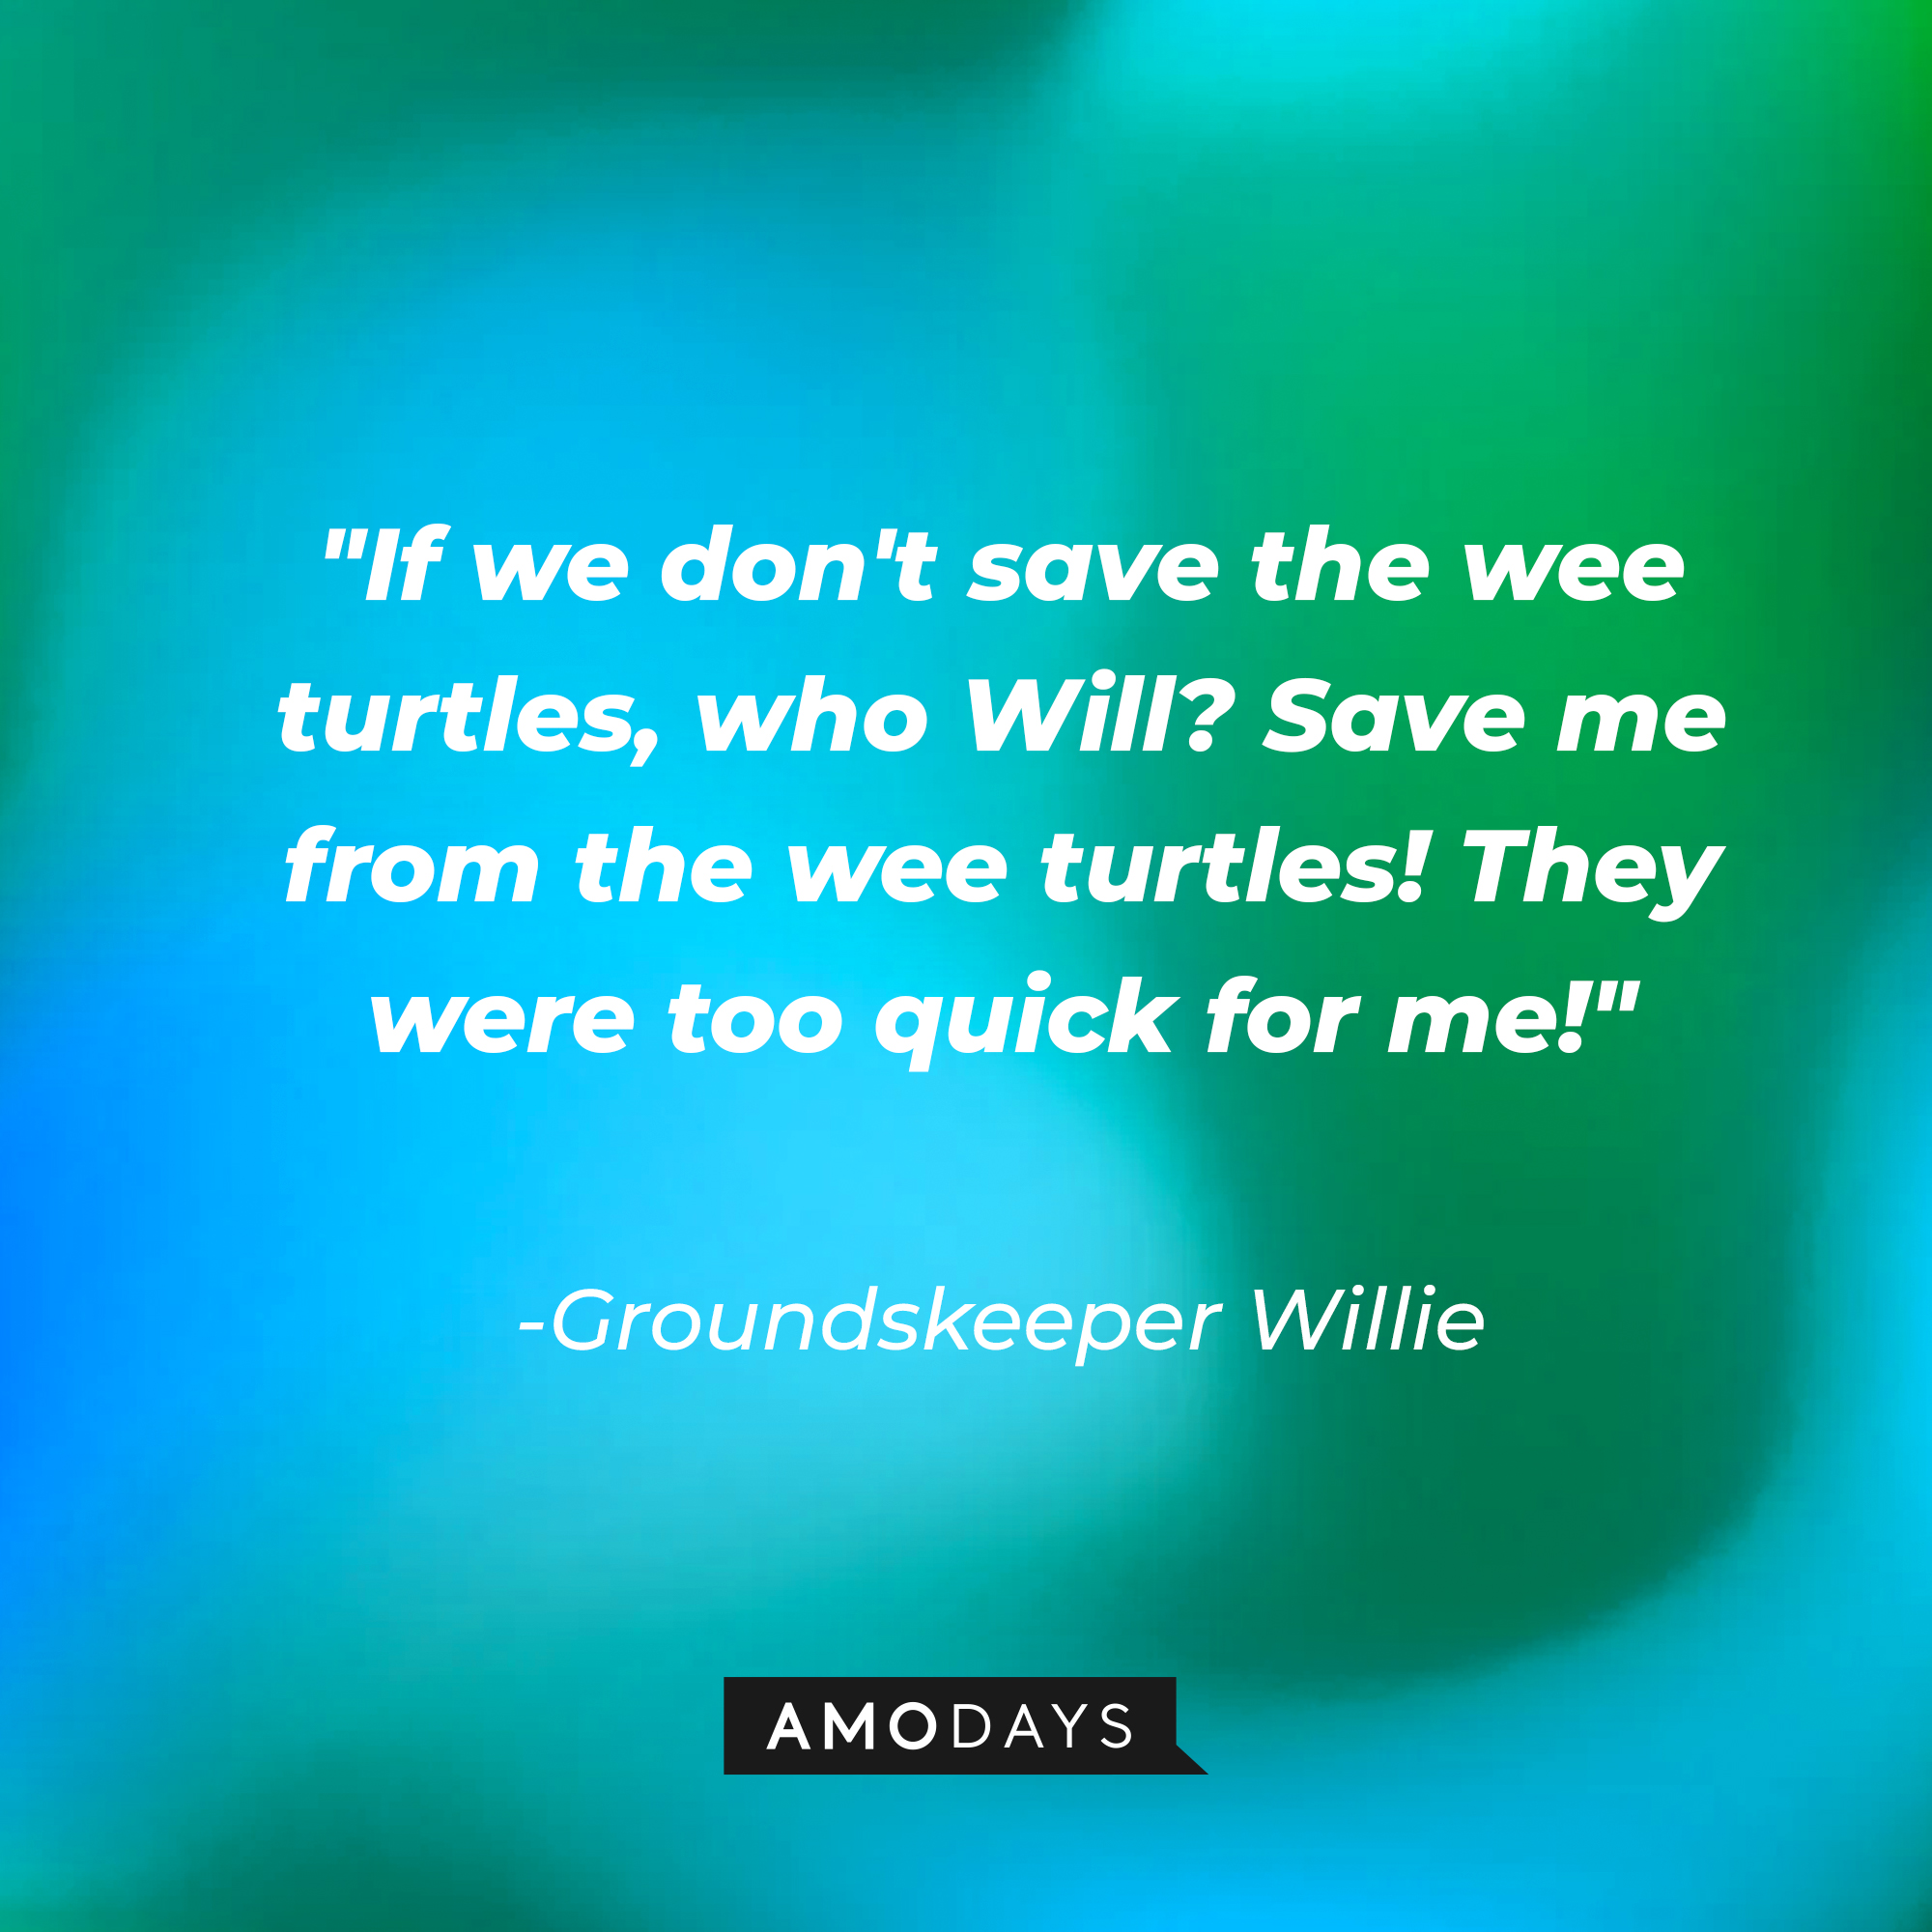 Groundskeeper Willie's quote: "If we don't save the wee turtles, who Will? Save me from the wee turtles! They were too quick for me!" | Source: AmoDays